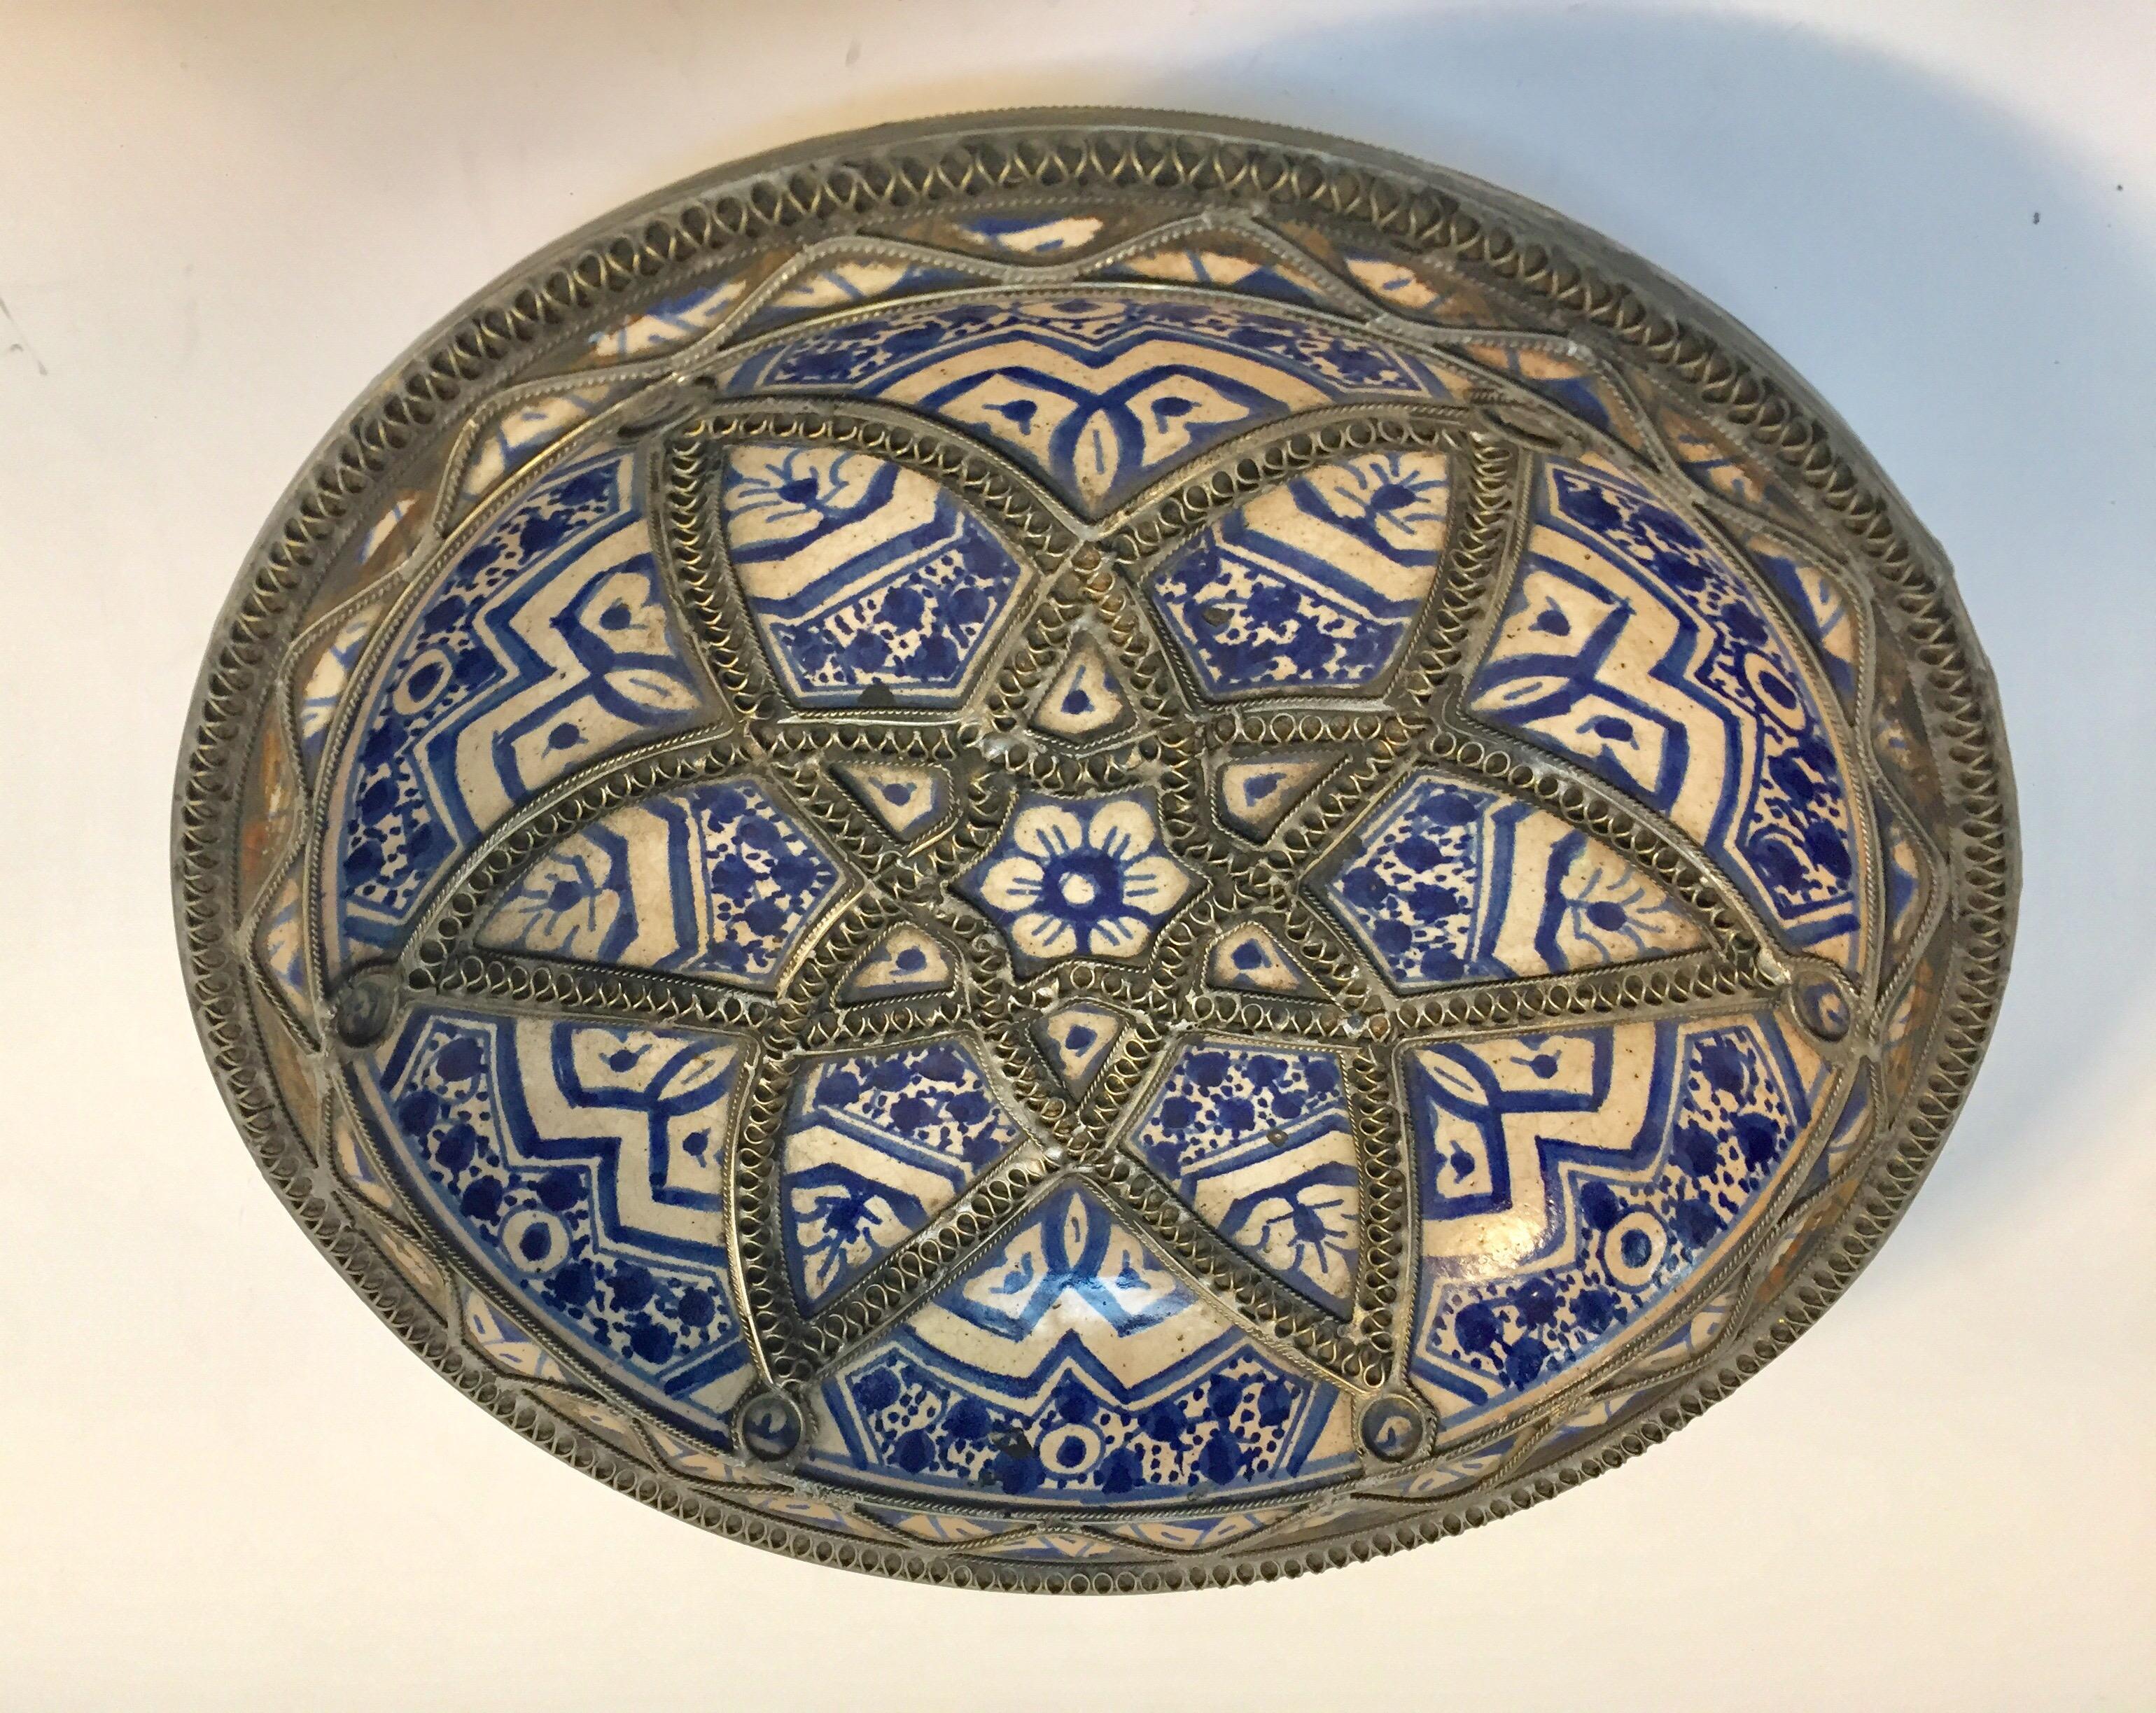 Hand-Crafted Decorative Moorish Blue and White Handcrafted Ceramic Bowl from Fez